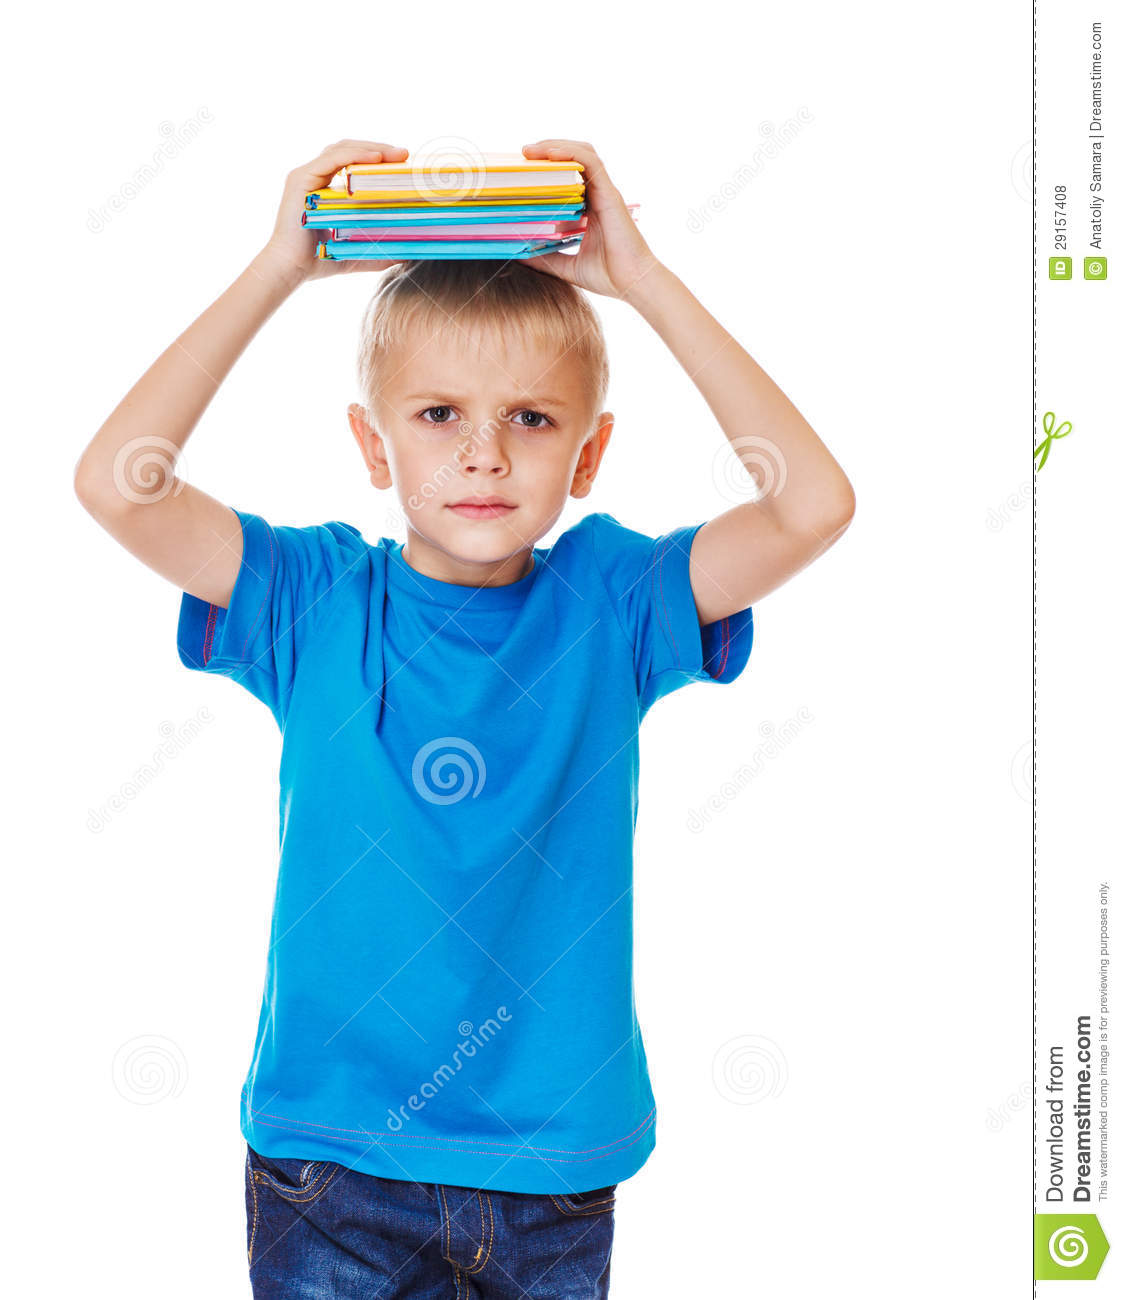 Angry Student Royalty Free Stock Photos   Image  29157408